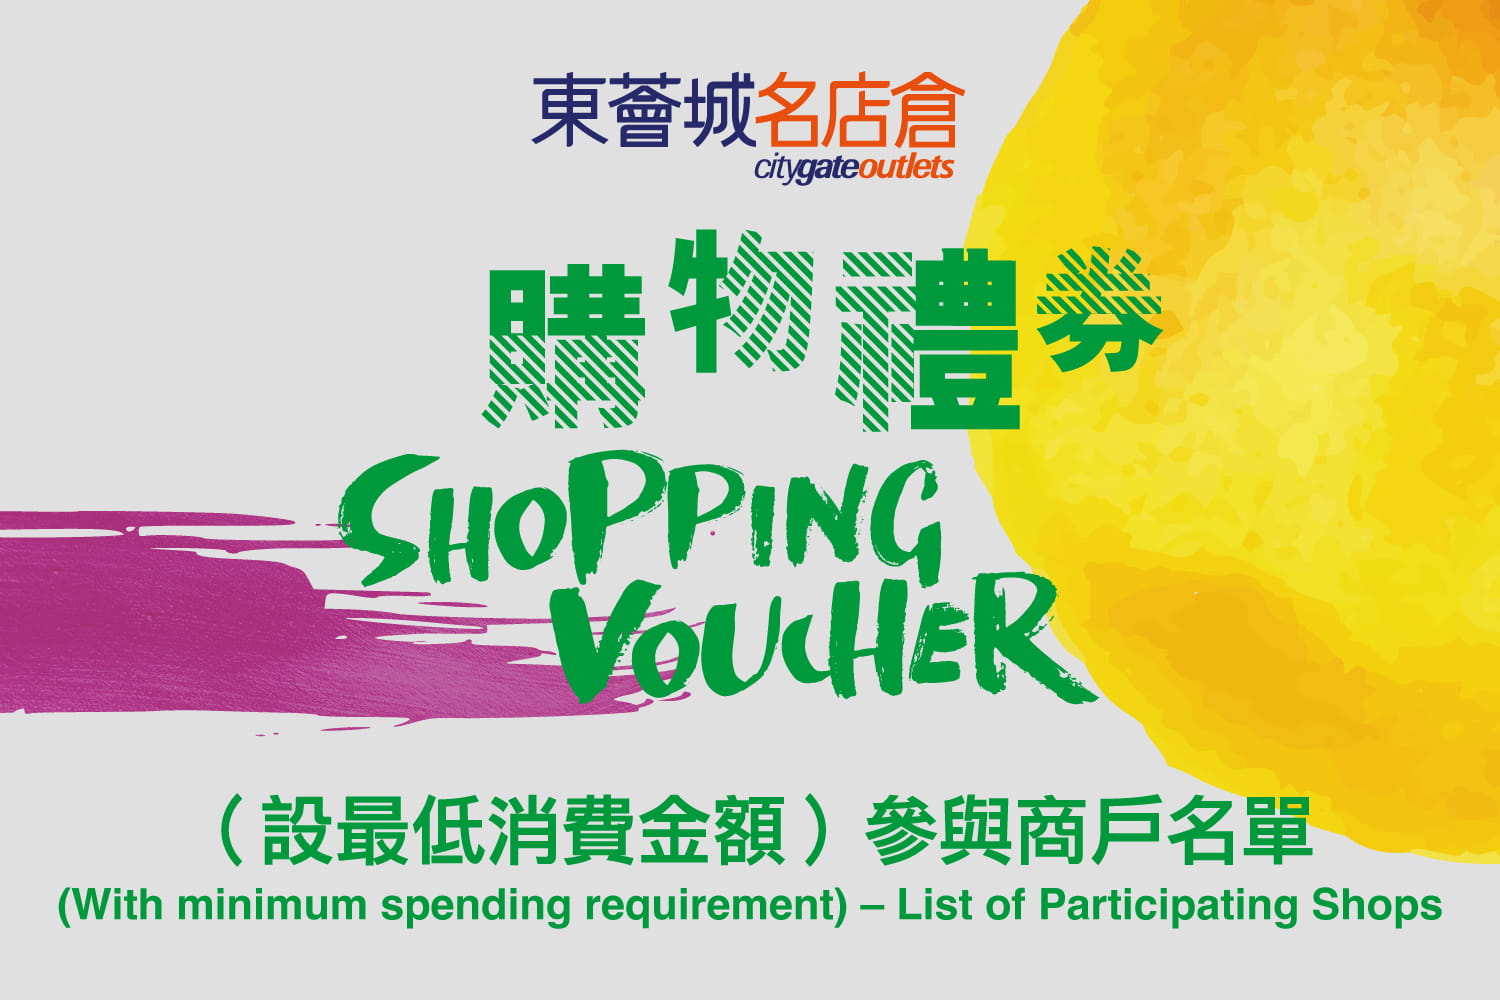 Citygate Outlets Shopping e-Voucher (With minimum spending requirement) – List of Participating Shops